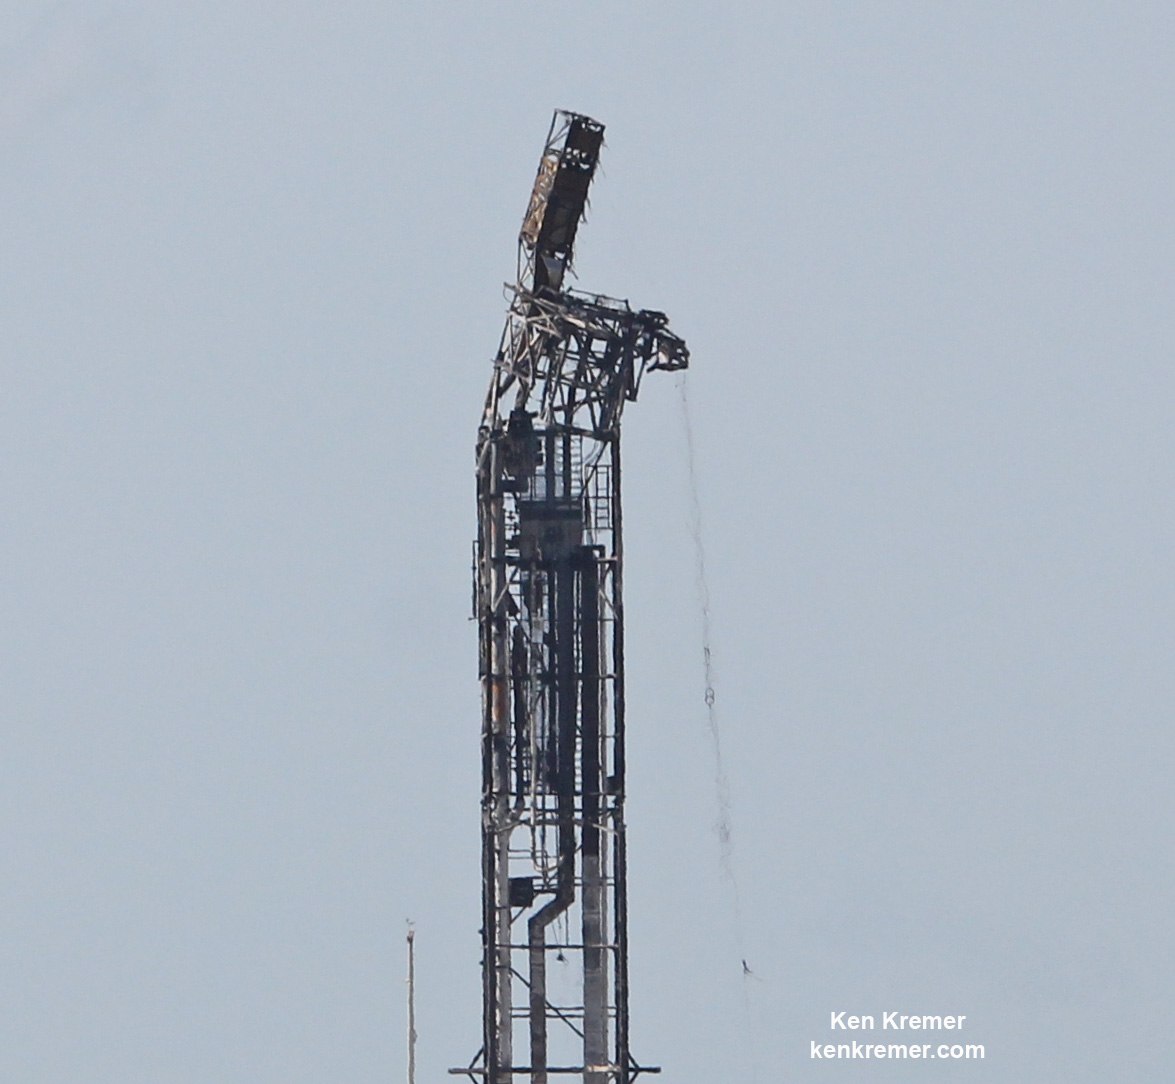 Up close view of top of mangled SpaceX Falcon 9 strongback with dangling cables (at right) as seen on Sept. 7 after prelaunch explosion destroyed the rocket and AMOS-6 payload and damaged the pad at Space Launch Complex-40 at Cape Canaveral Air Force Station, FL on Sept. 1, 2016 . Credit: Ken Kremer/kenkremer.com